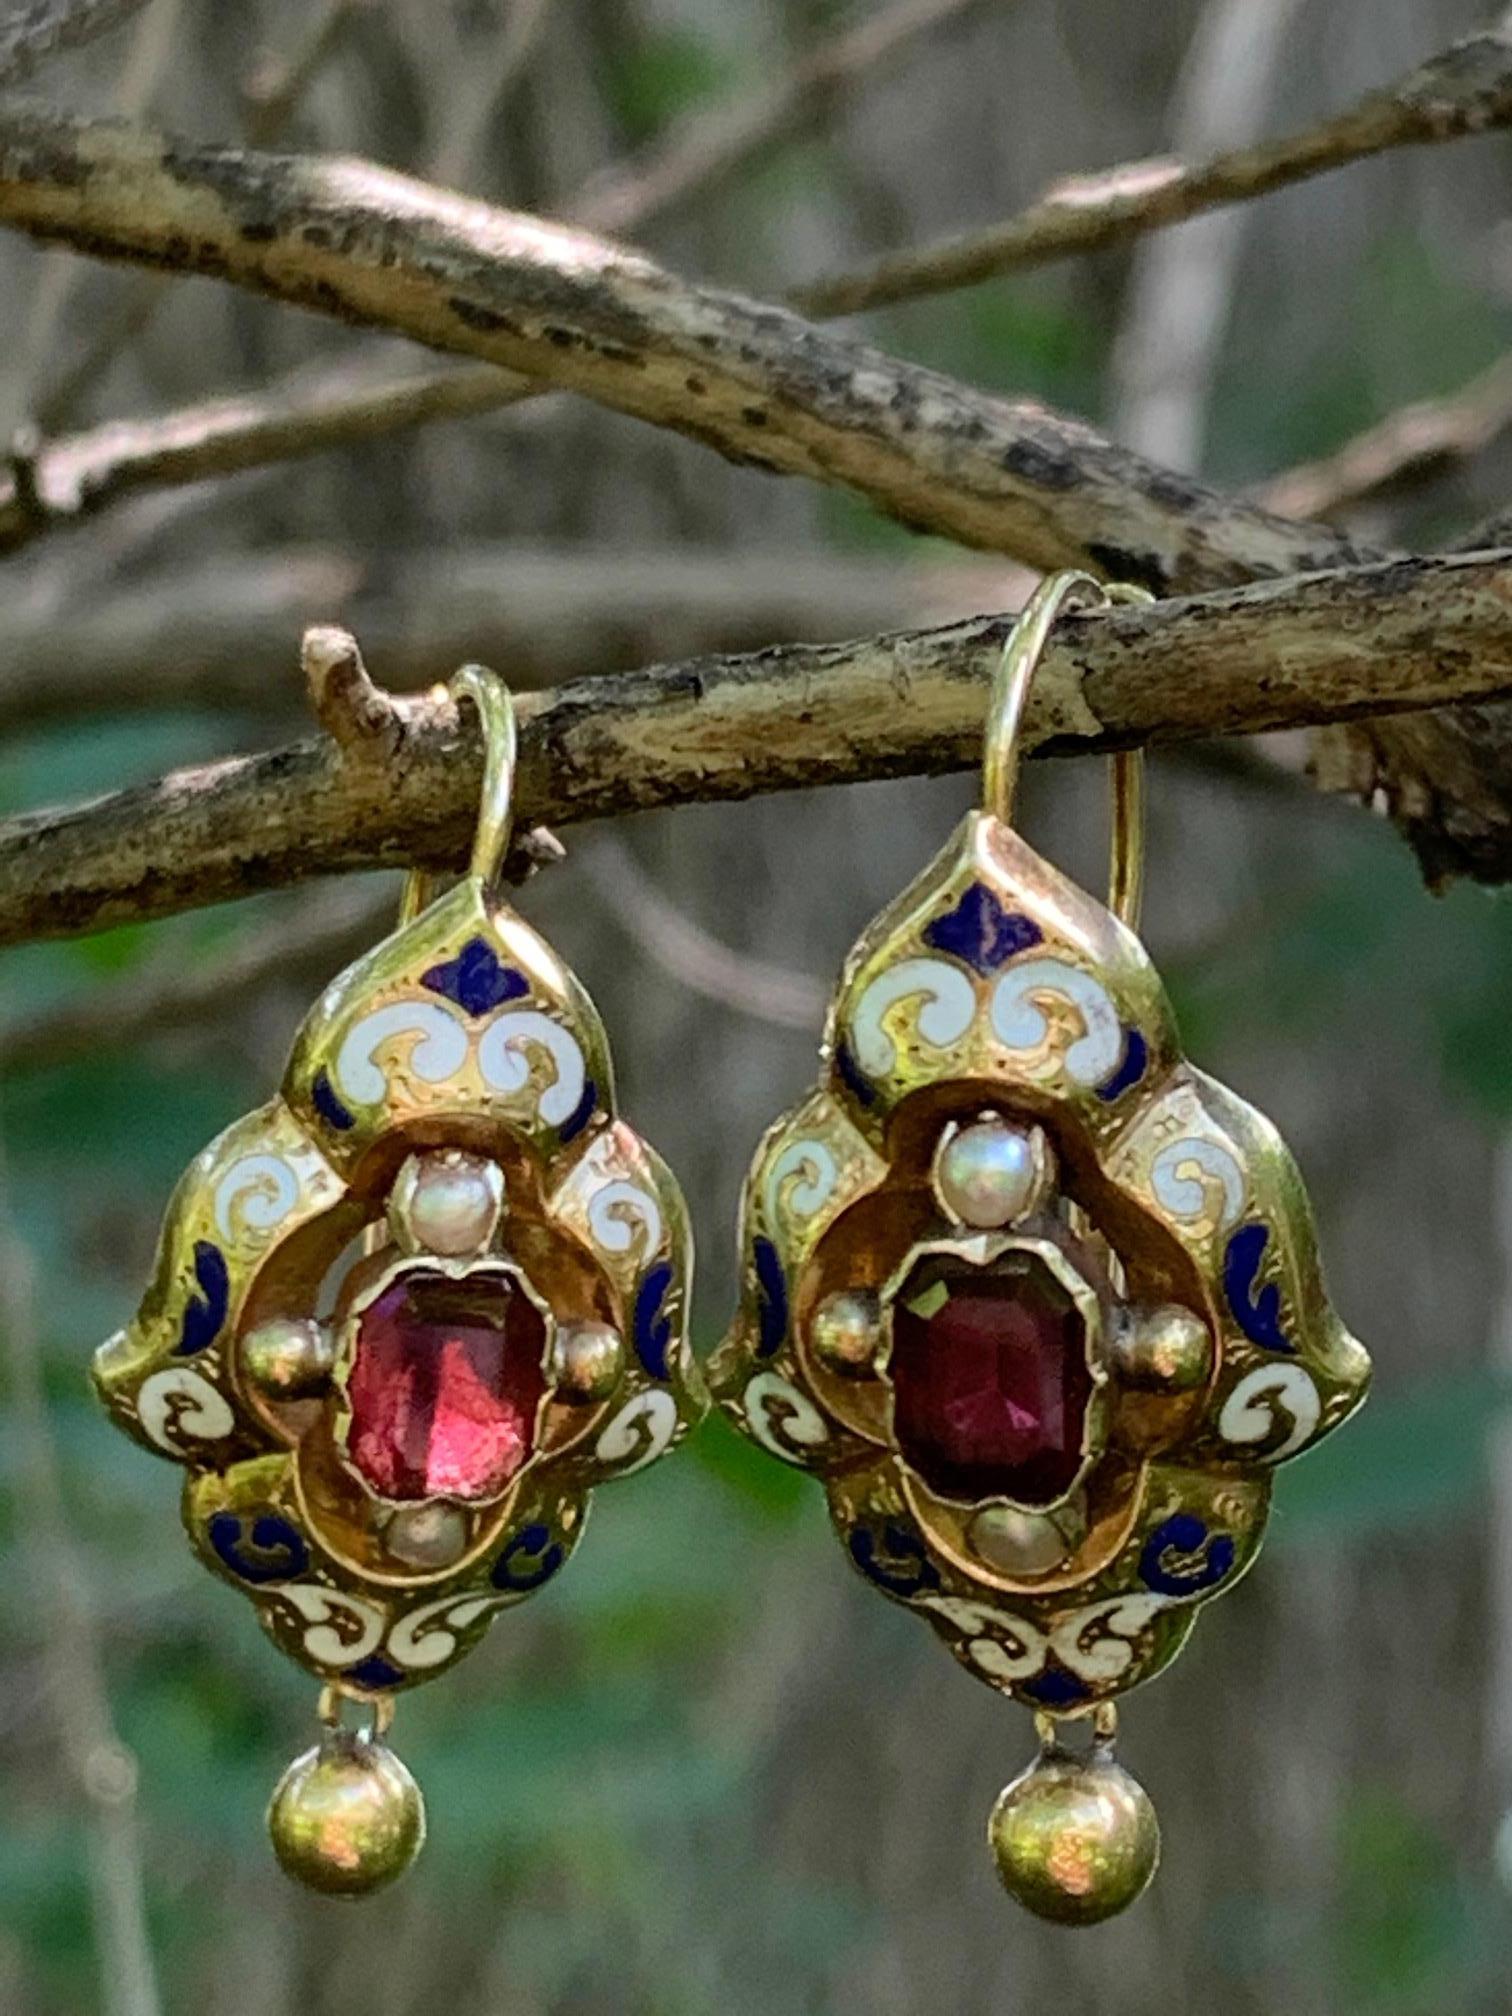 Well, these earrings are quite the beauties.  The center stone is an emerald cut garnet.  There are two small pearls place at the top and bottom of the center stone.  Each earring has a gold ball dangling nicely from the main part of the earring. 